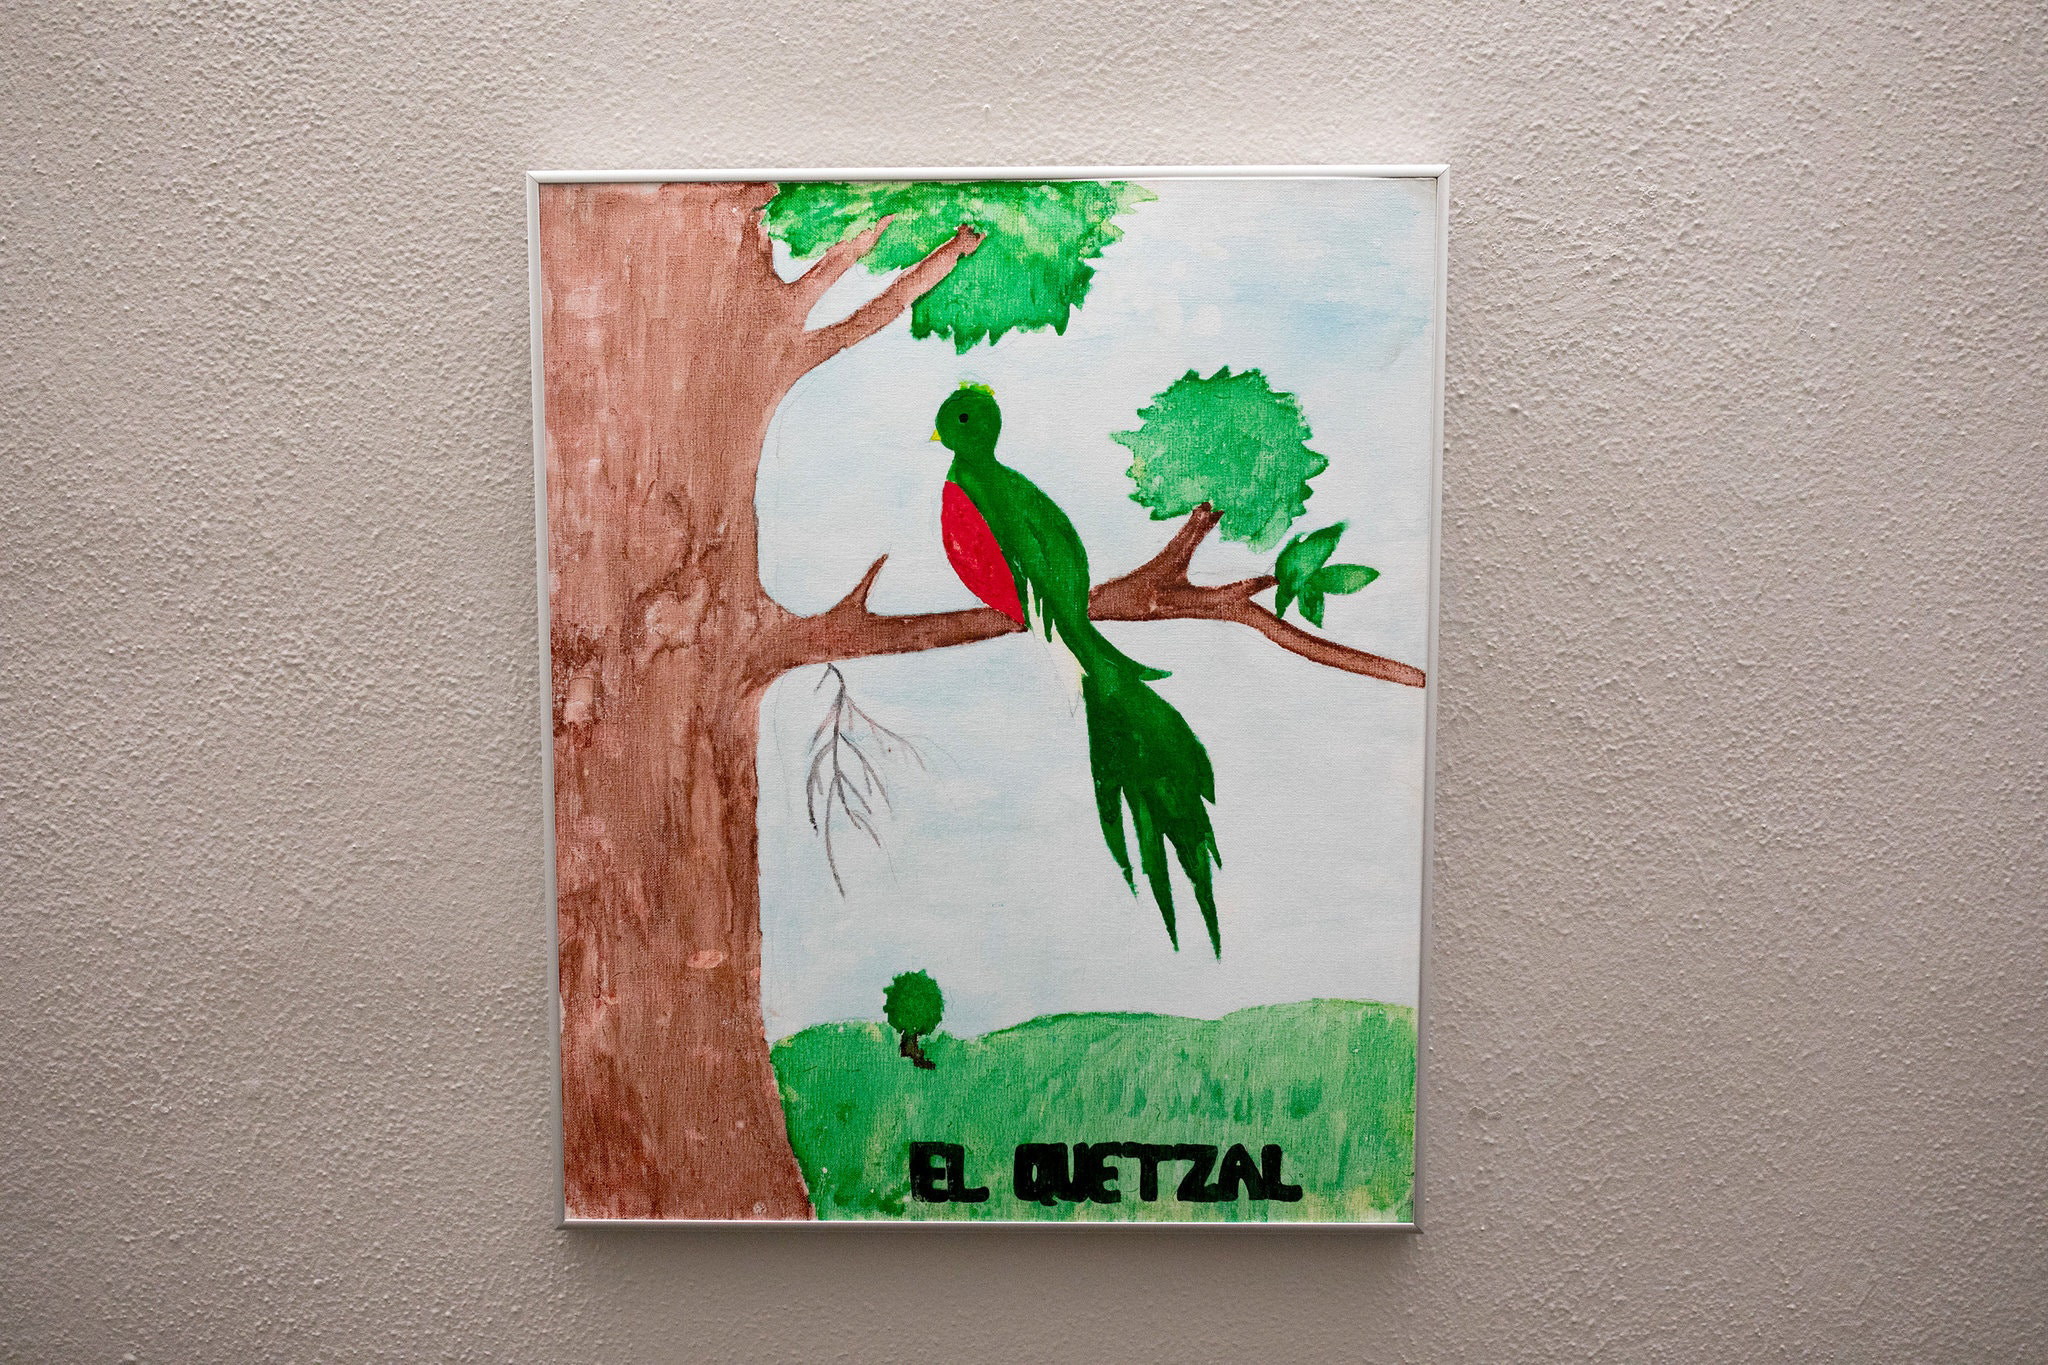 As part of a social studies project, children were asked to commemorate their native cultures. The quetzal is the national bird of Guatemala and a symbol of freedom. Photo by Ivan Pierre Aguirre